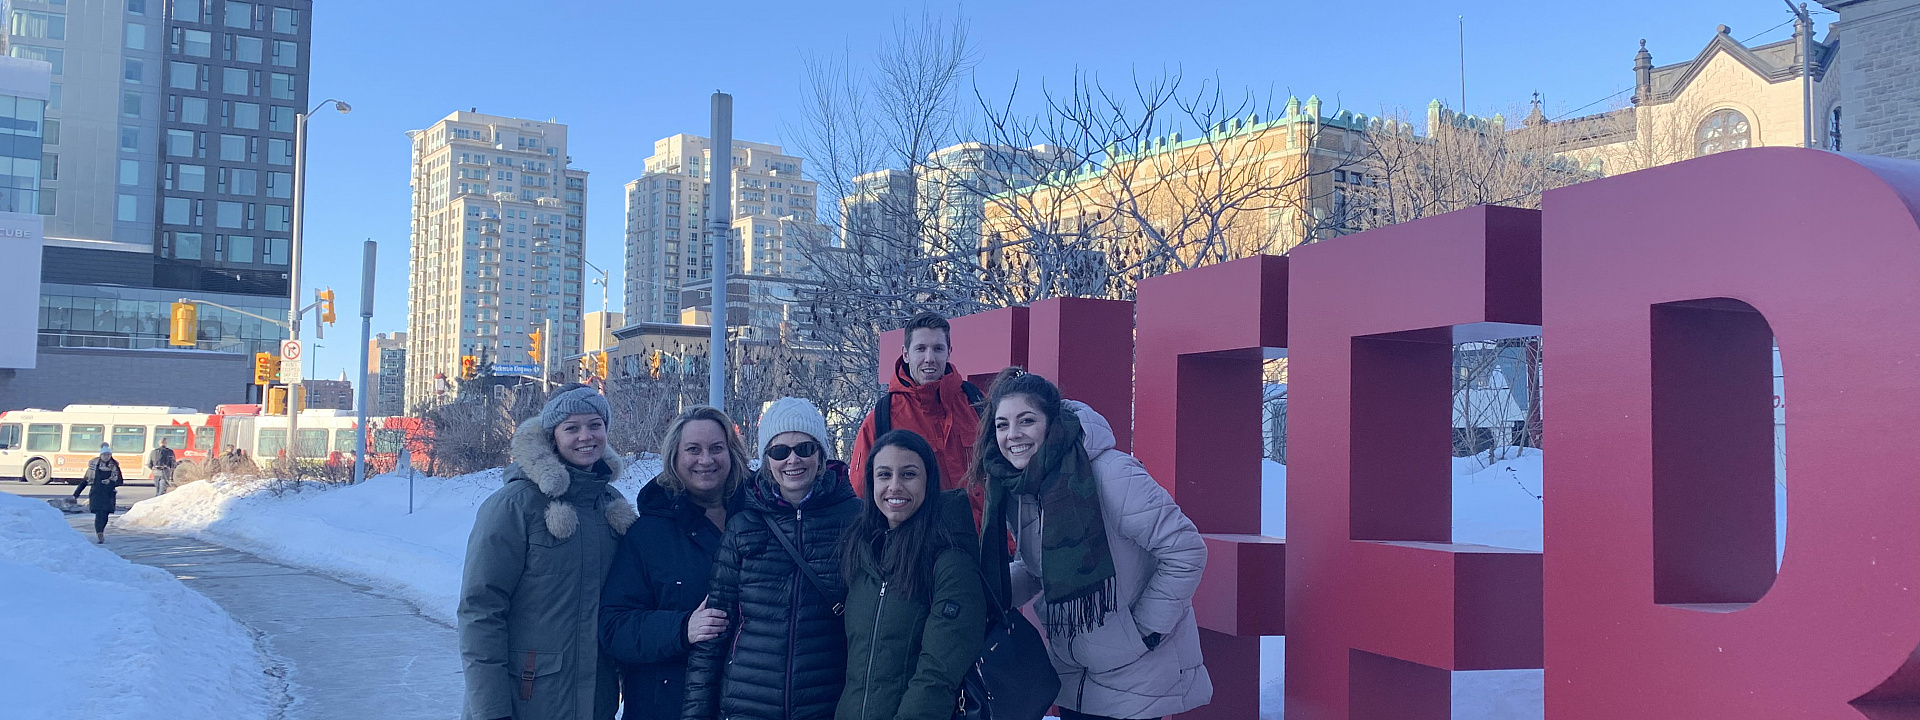 People smiling in front of outdoor Telfer letters